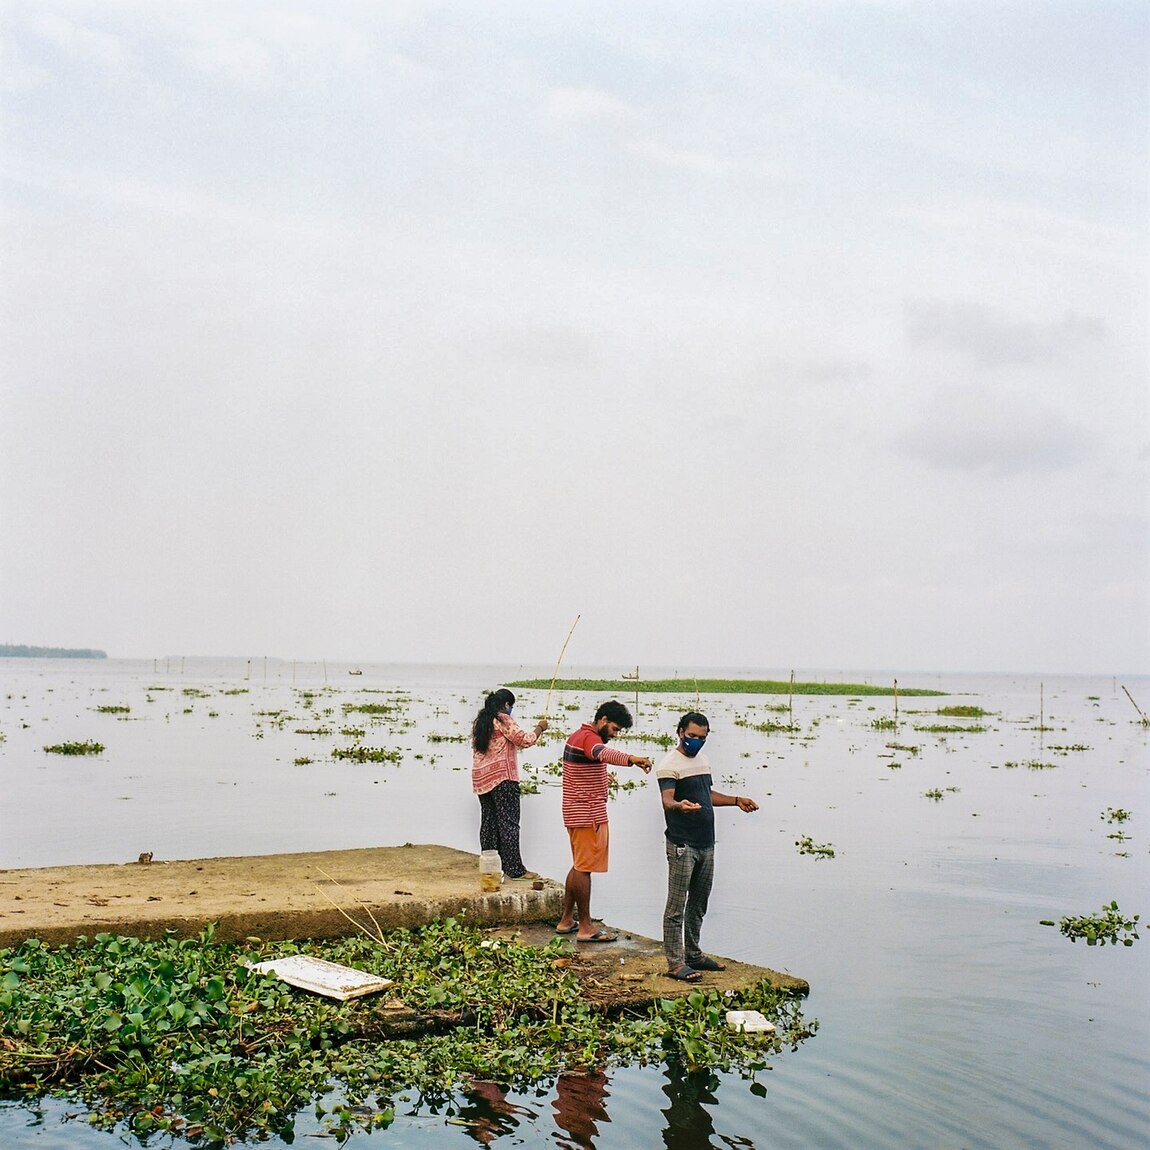 Both recreational and professional fishermen cast lines and nets in Lake Vembanad. The lake has seen a 40 percent drop in its fish population in recent years due to pollution and climate change.